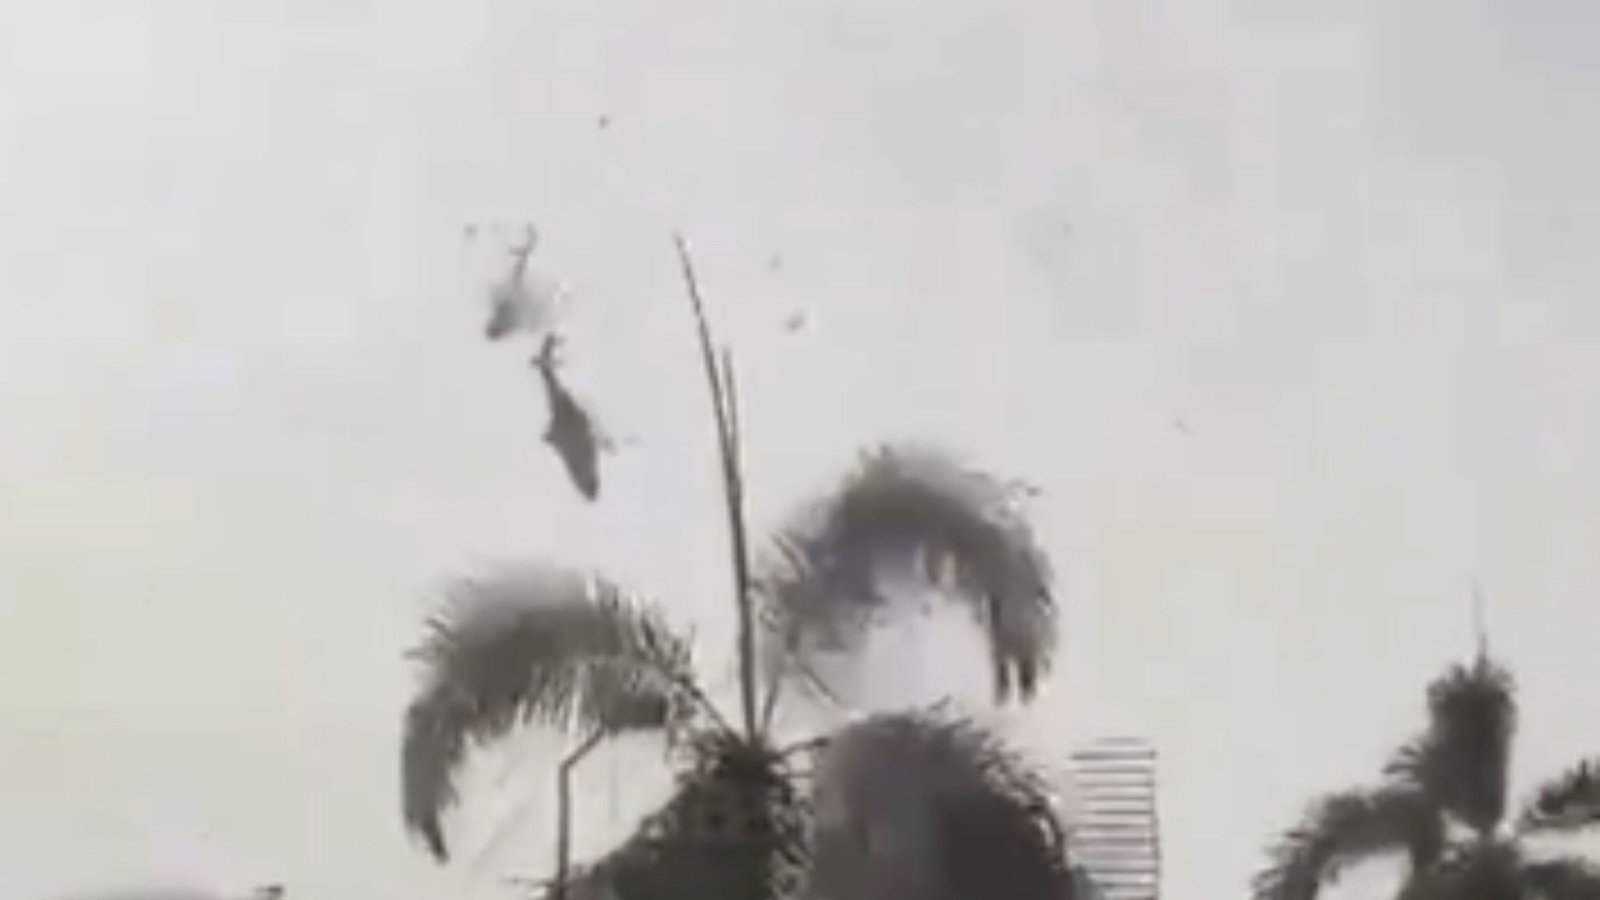 Shocking moment military helicopters crash mid air sending them hurtling to ground killing all 10 onboard in Malaysia